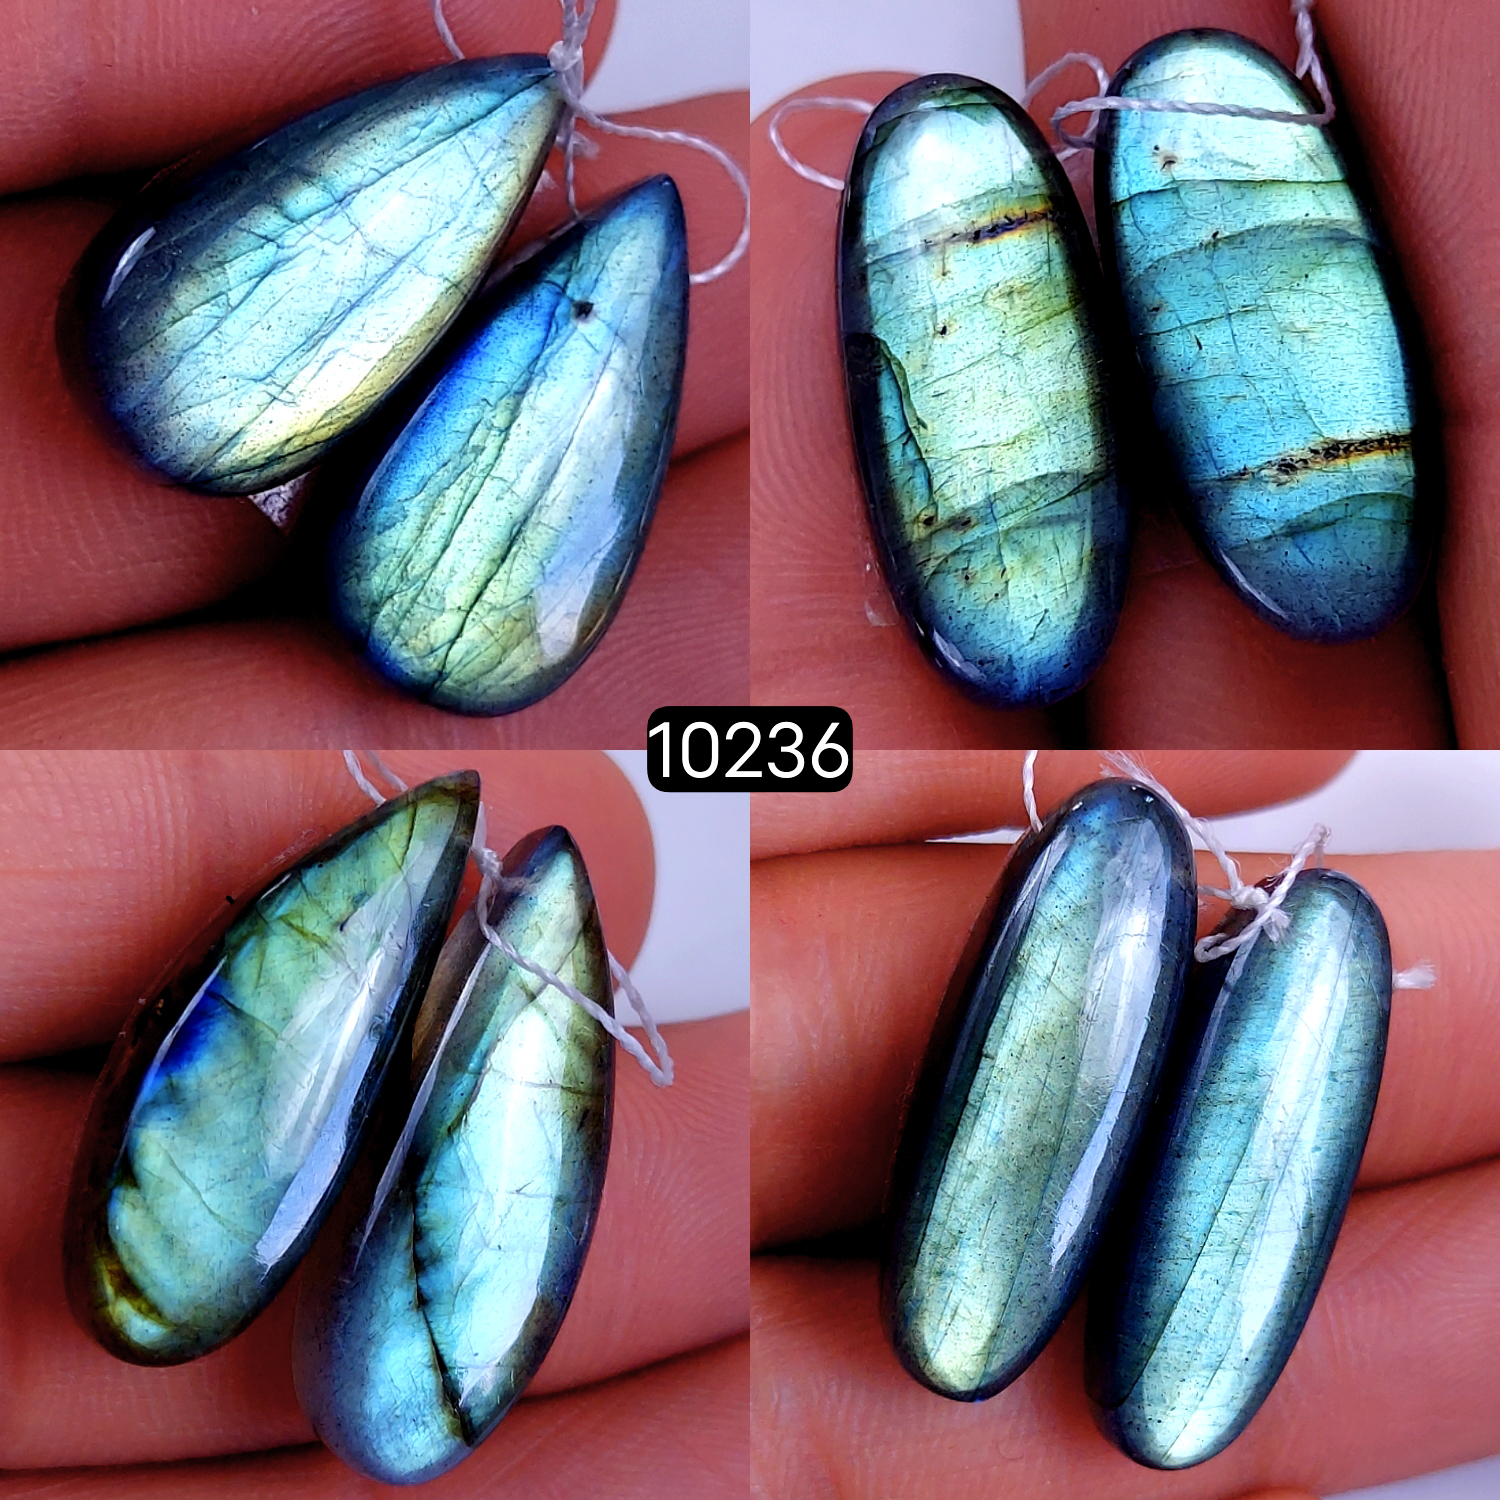 4Pair 117Cts Natural Labradorite Crystal Drill Dangle Drop Earring Pairs Silver Earrings Blue Labradorite Hoop Jewelry  27x10 22x12mm #10236